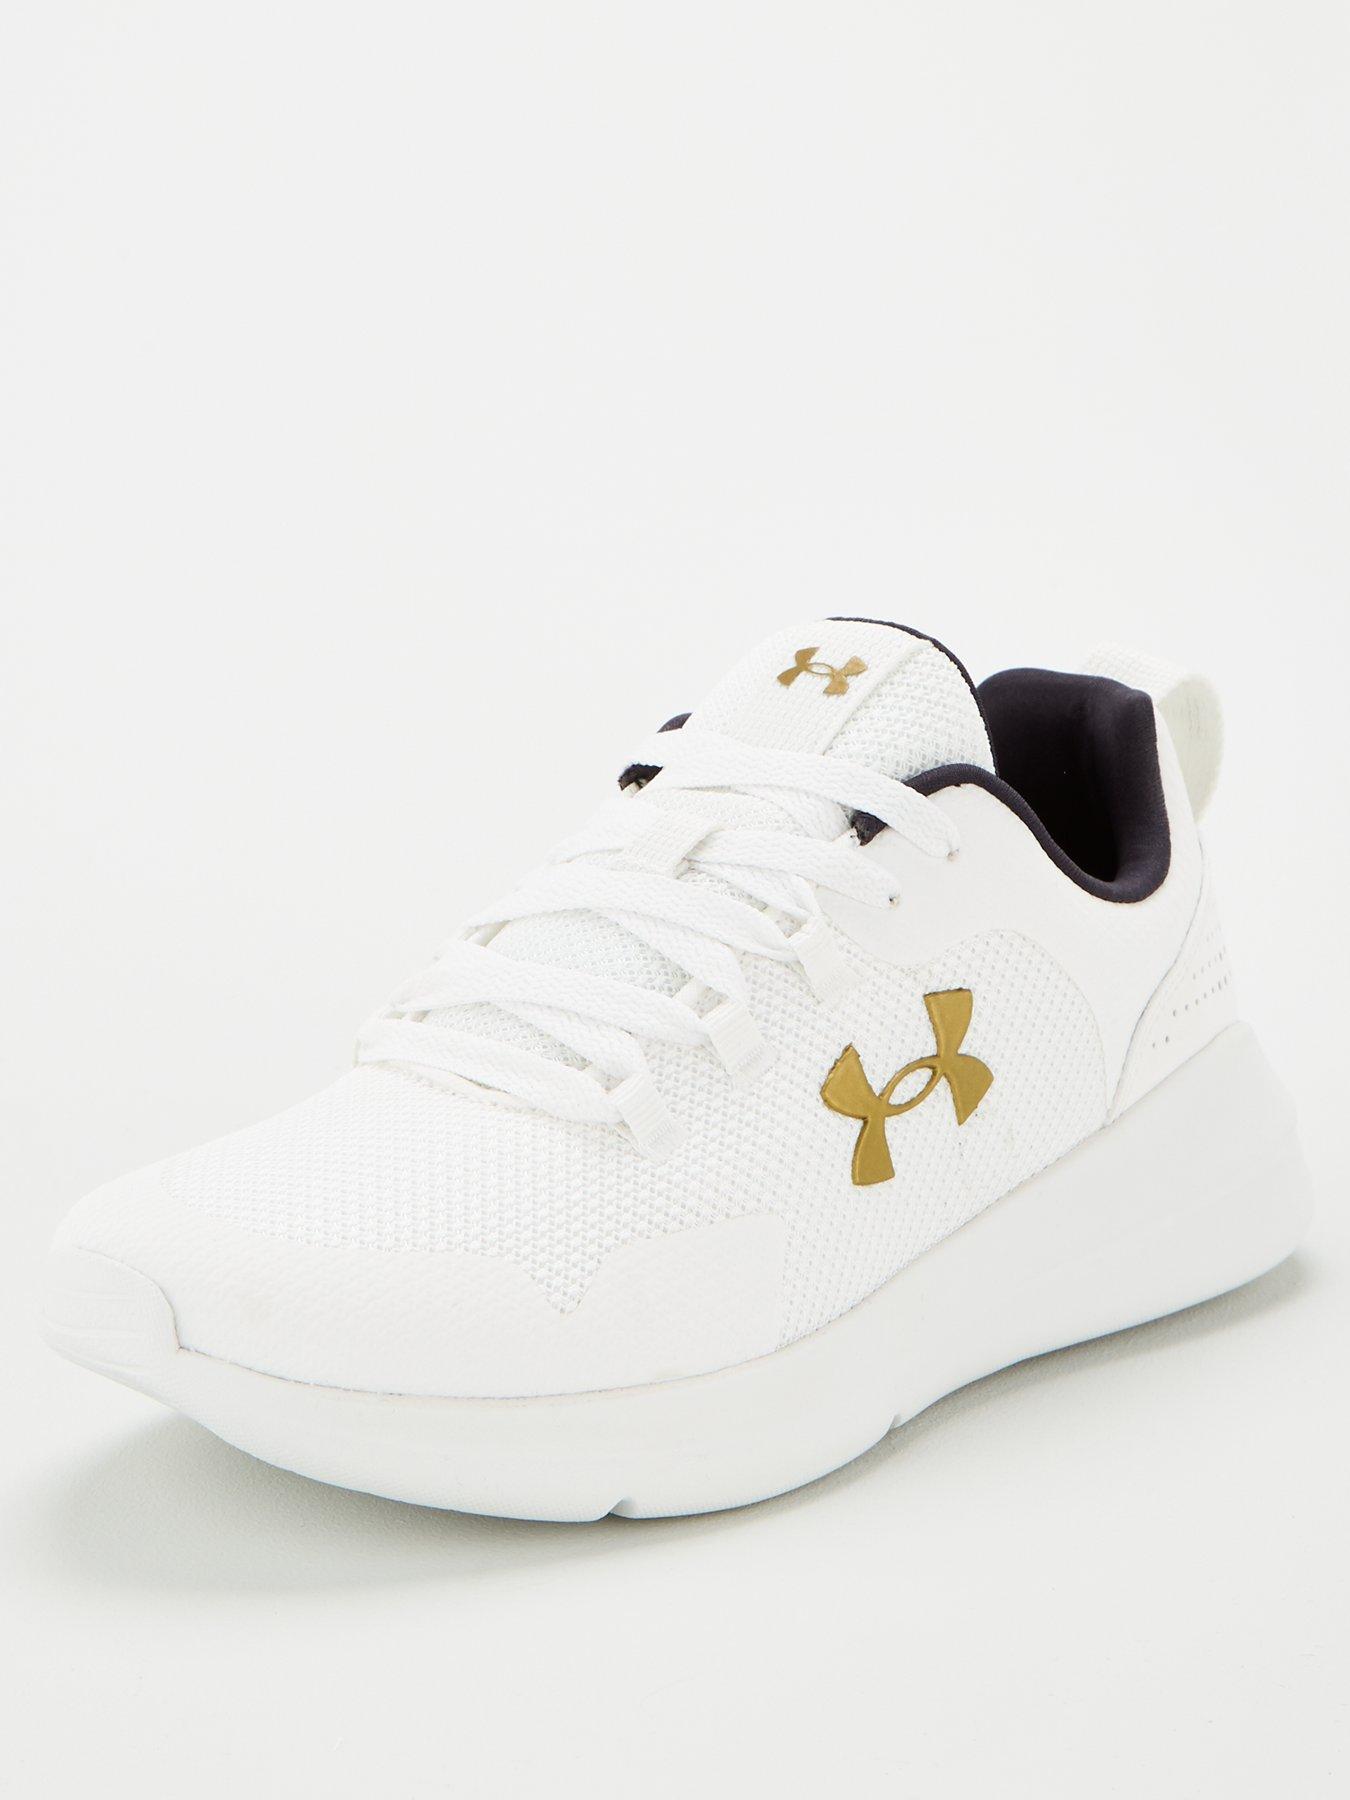 under armour white trainers womens